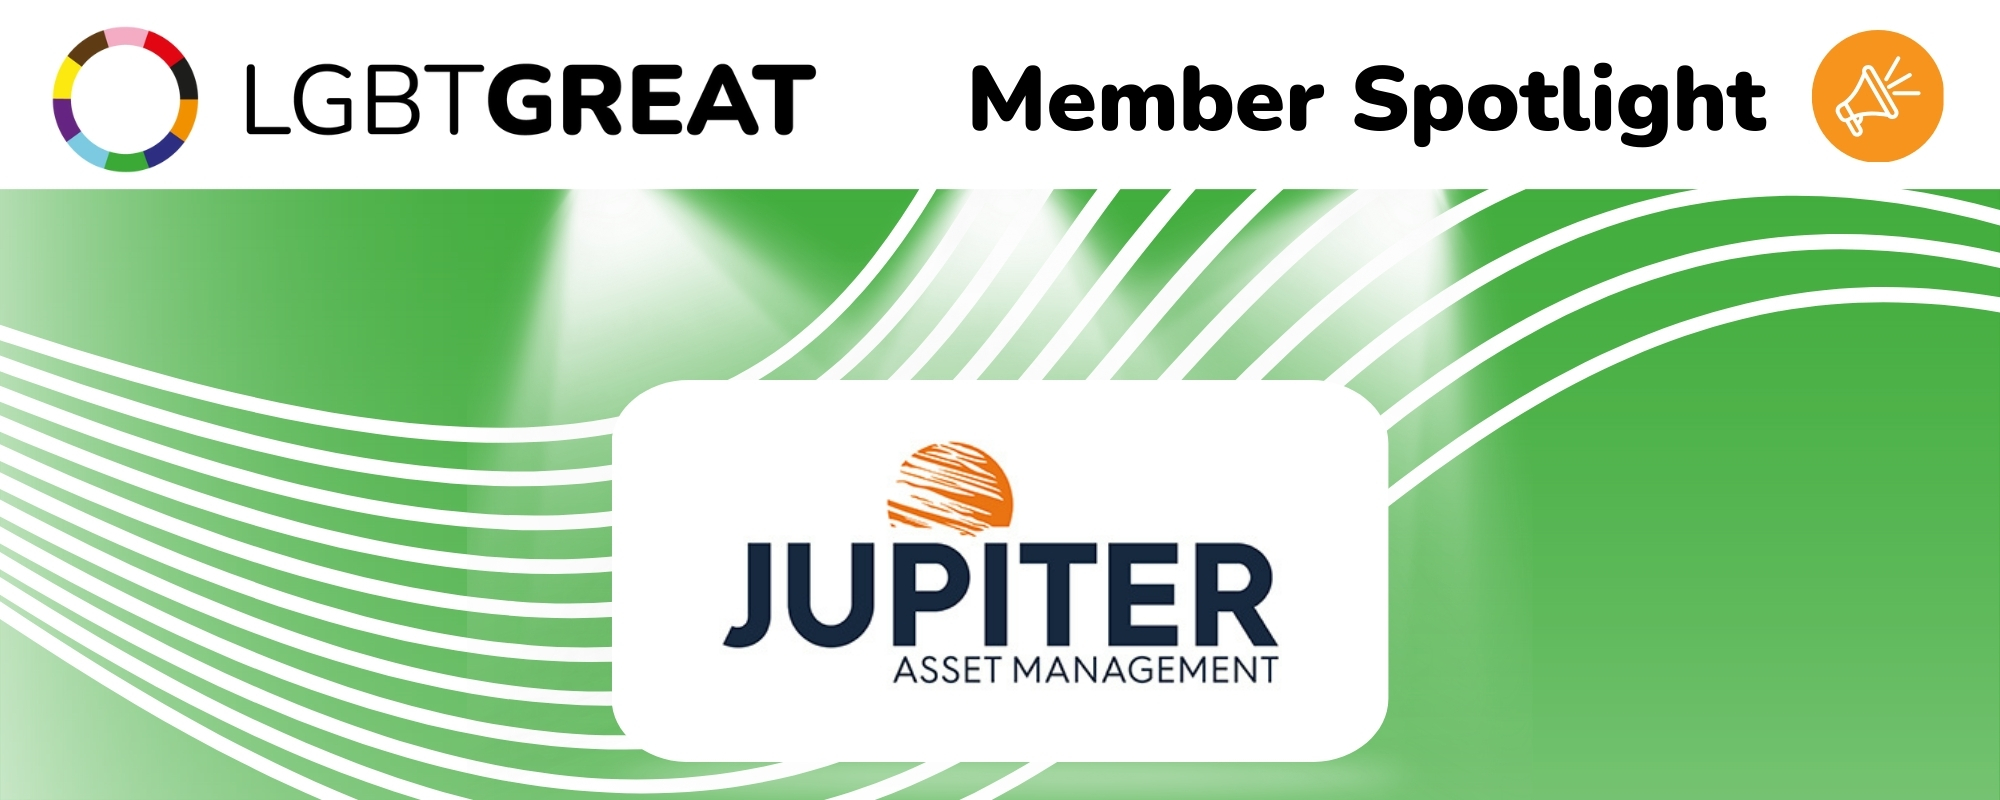 LGBT Great and Jupiter Logos side by side